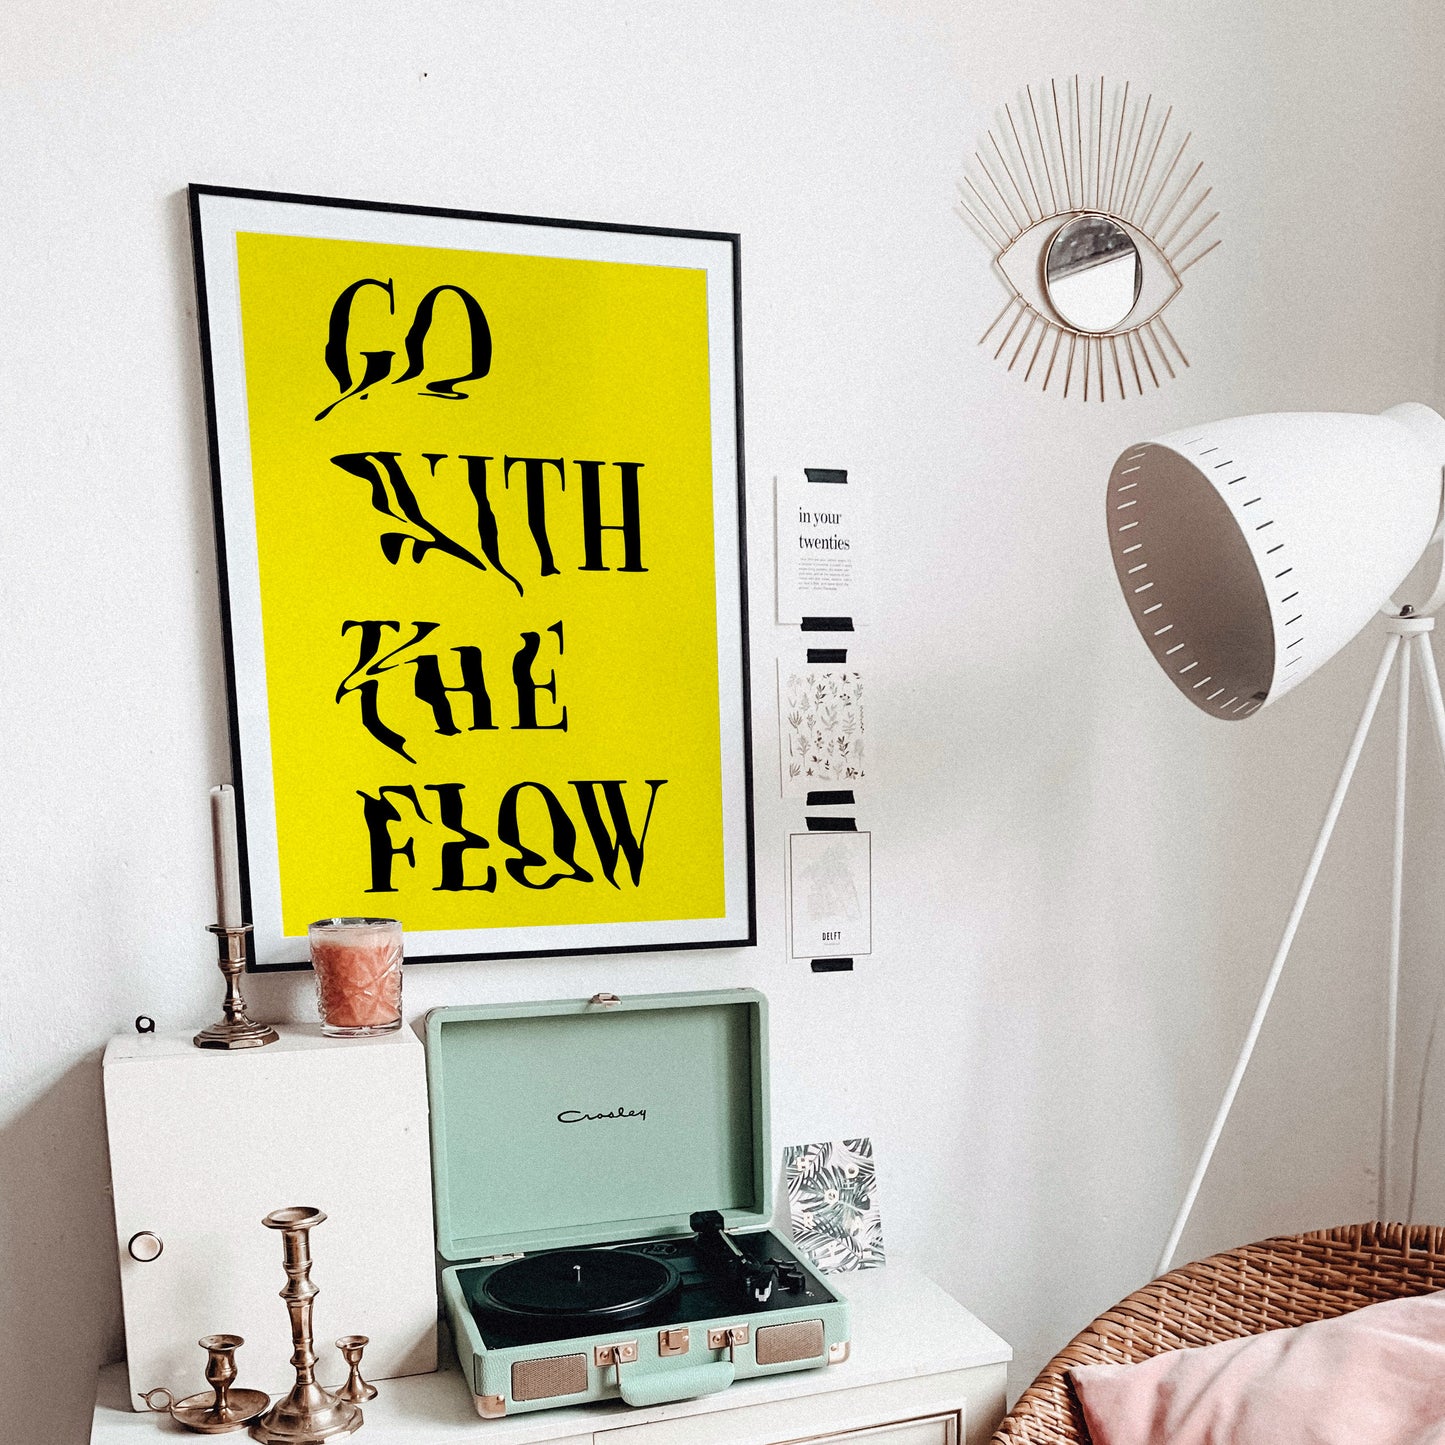 Go With The Flow Art Poster, Yellow Positive Motto Art Print, Minimalist Typography Motivational Slogan Home Decor Gift, Cool Quote Wall Art